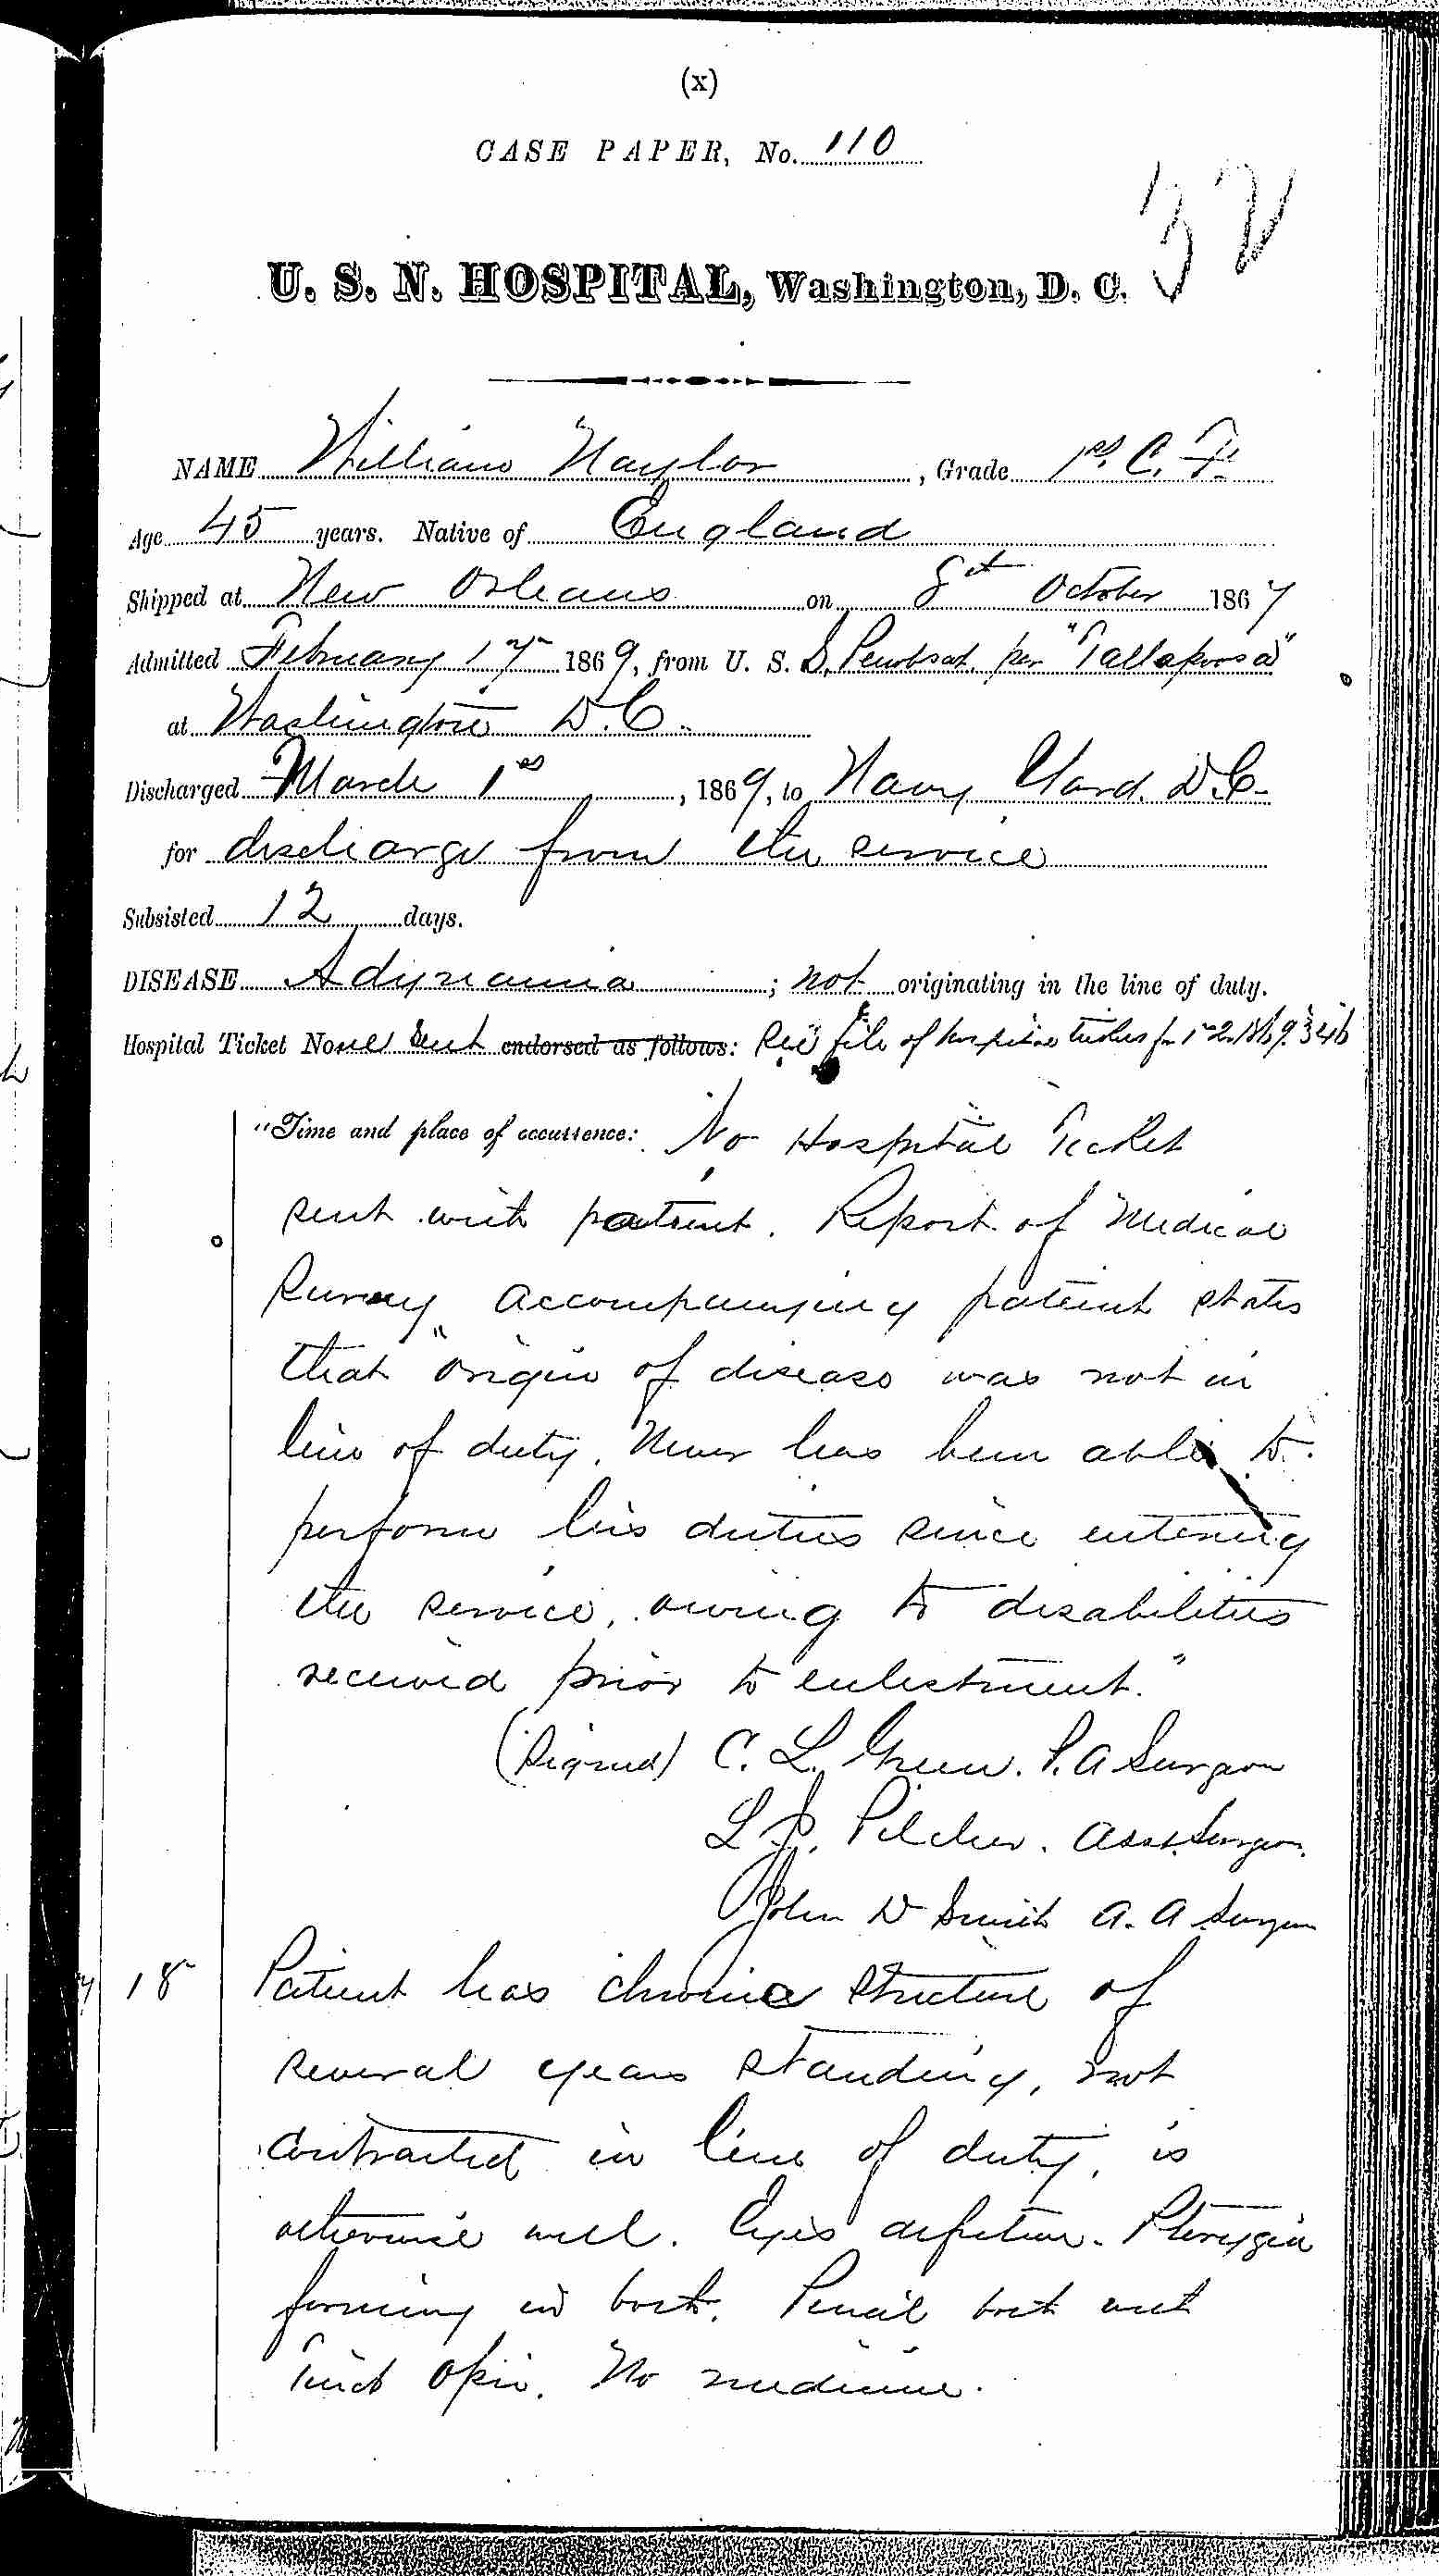 Entry for William Naylor (page 1 of 2) in the log Hospital Tickets and Case Papers - Naval Hospital - Washington, D.C. - 1868-69